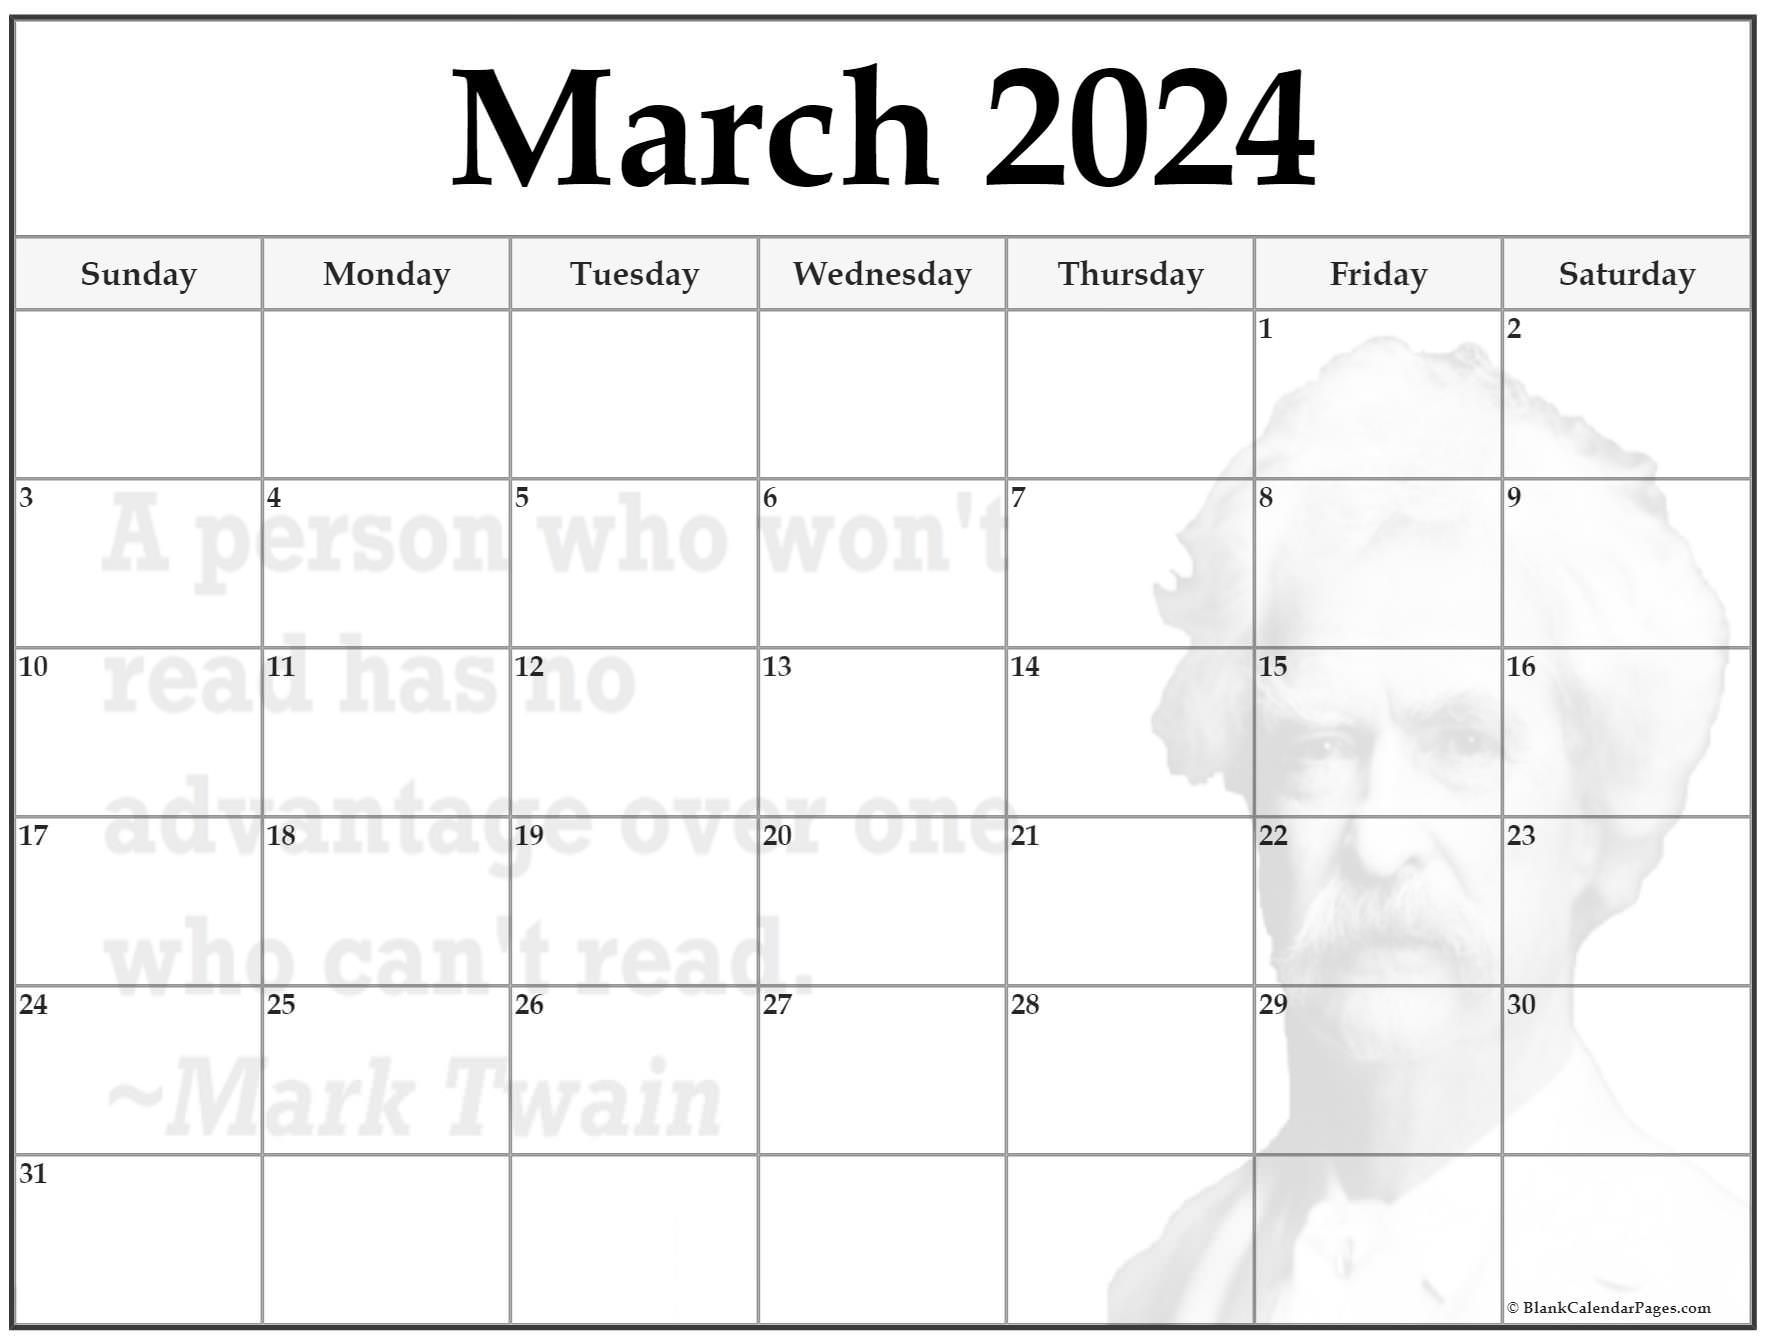 24-march-2023-quote-calendars